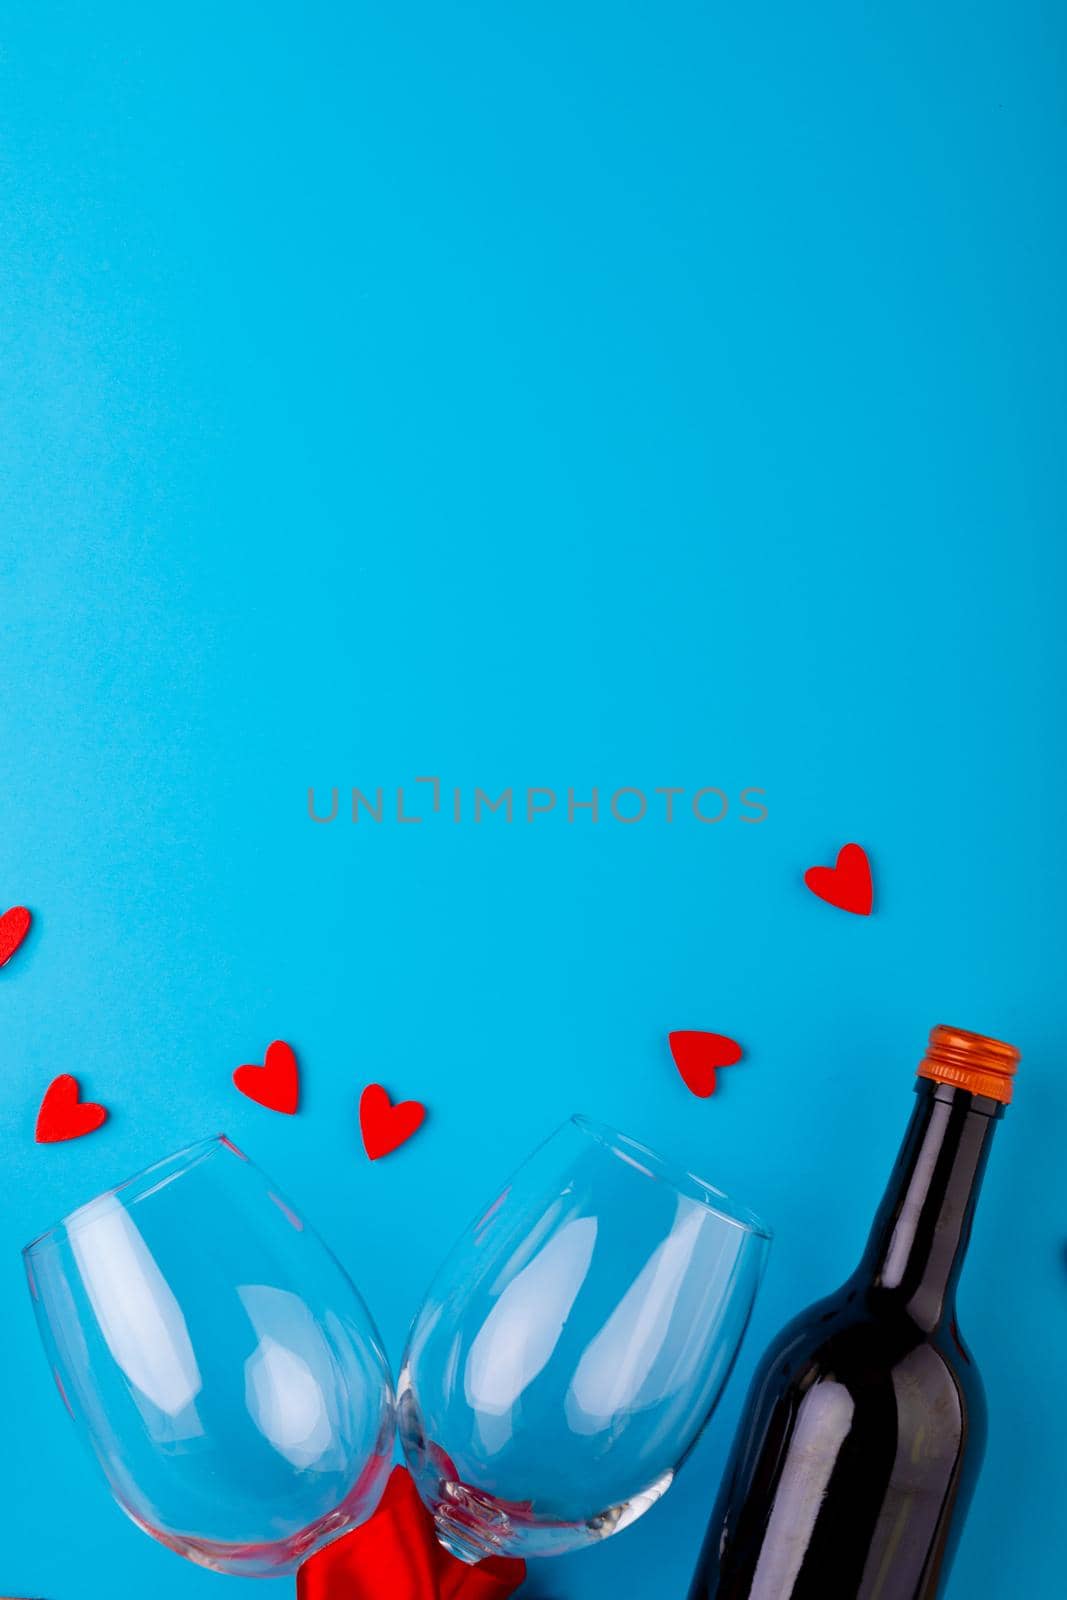 Red heart shapes by wine bottle and empty wineglasses over blue background with copy space by Wavebreakmedia